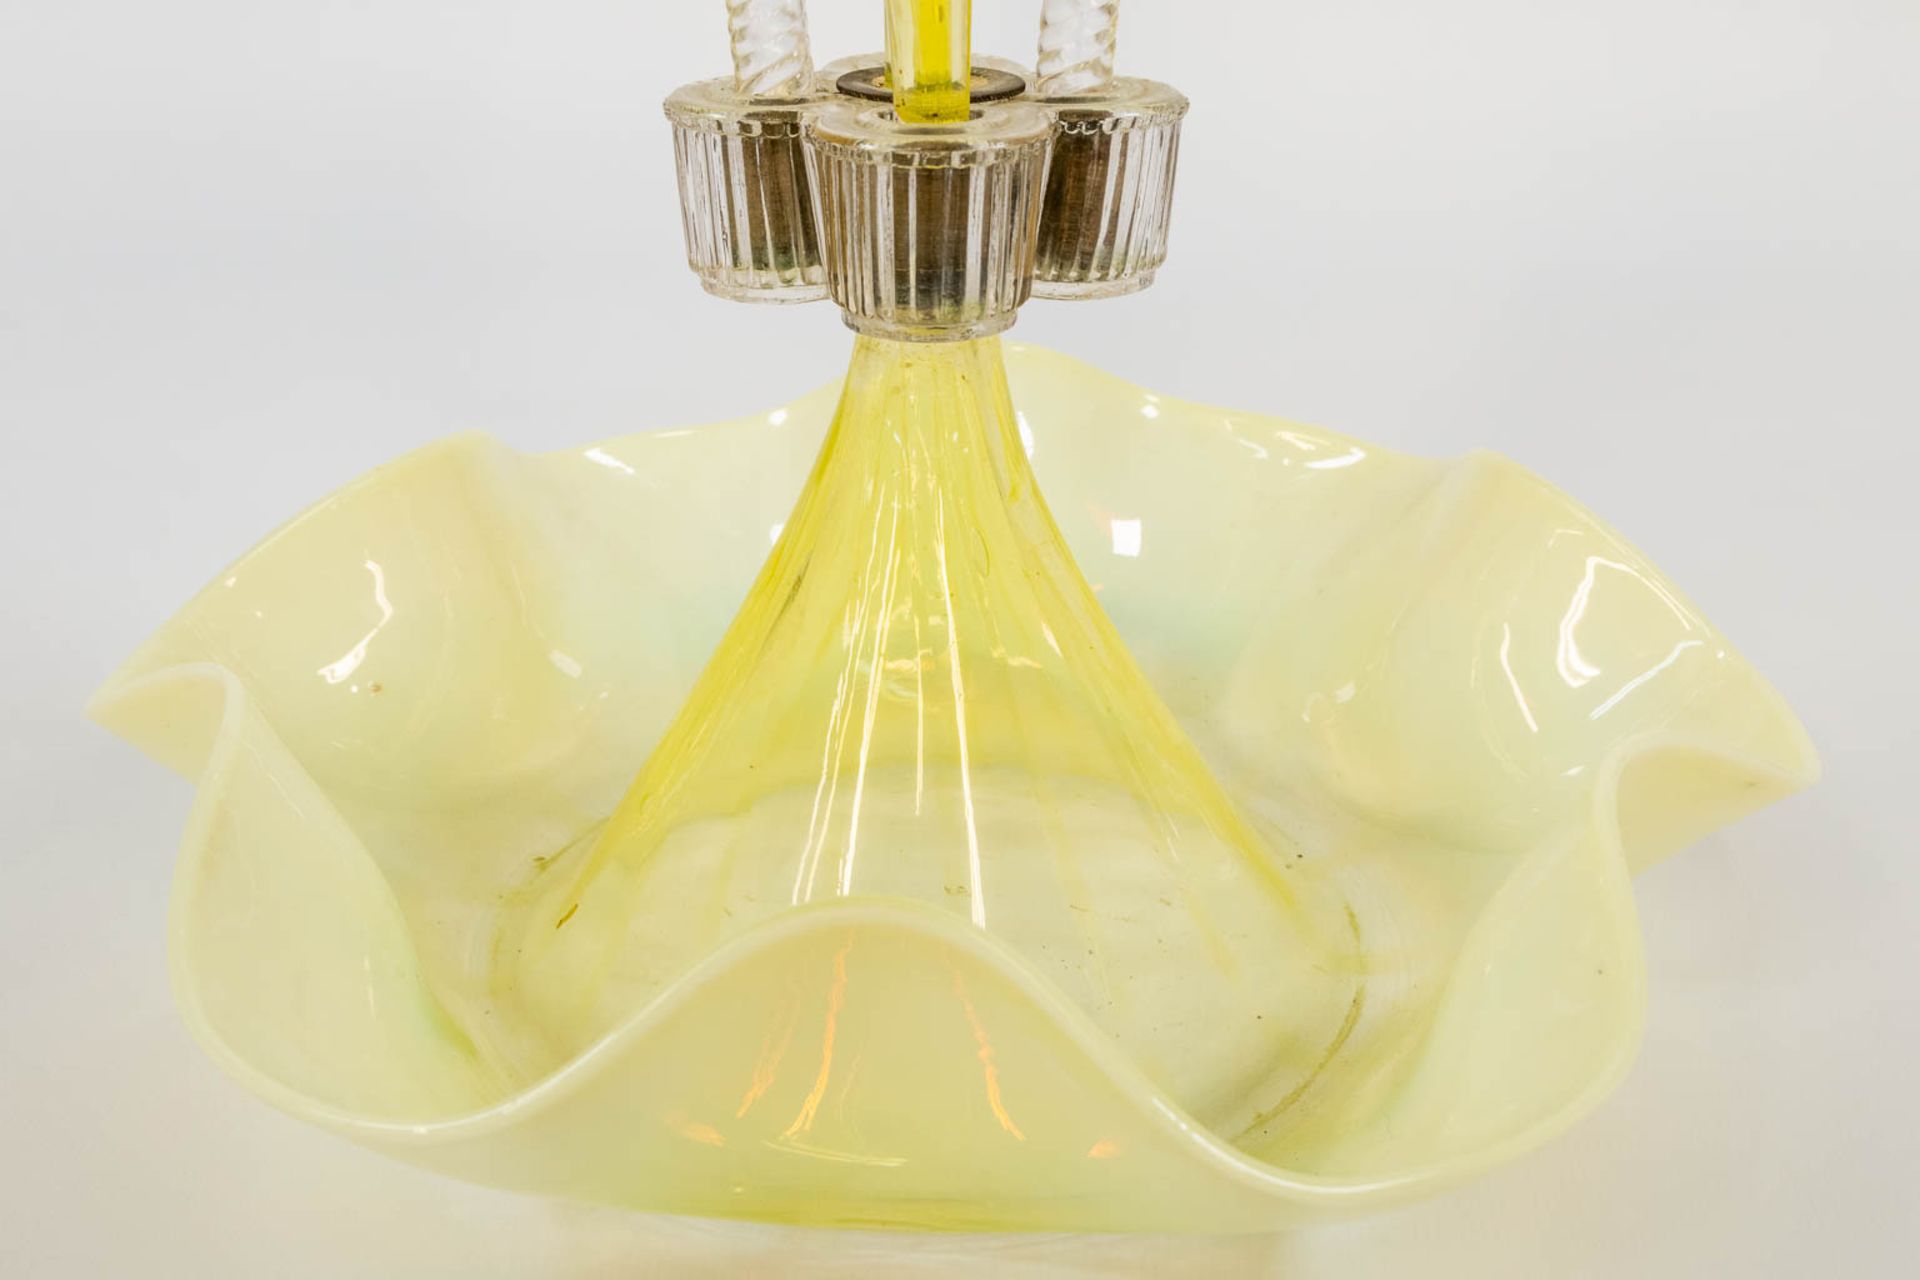 A yellow and clear glass table centrepiece pic-fleur, made in Murano, Italy. (25 x 28 x 45 cm) - Bild 10 aus 15